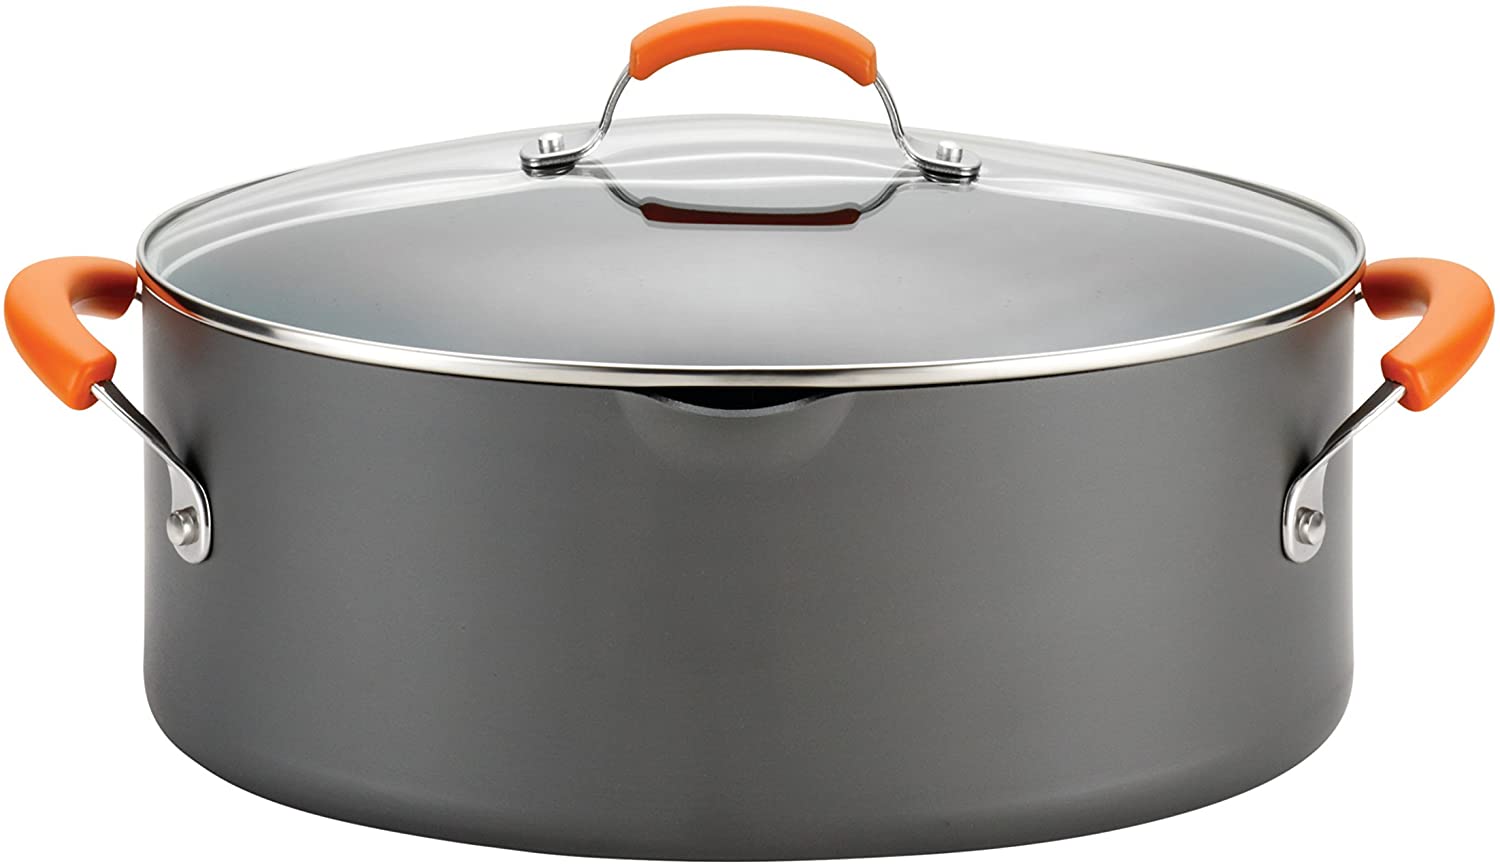 Rachael Ray Hard Anodized Orange Handles 8 Qt. Covered Oval Pasta Pot with Pour Spout